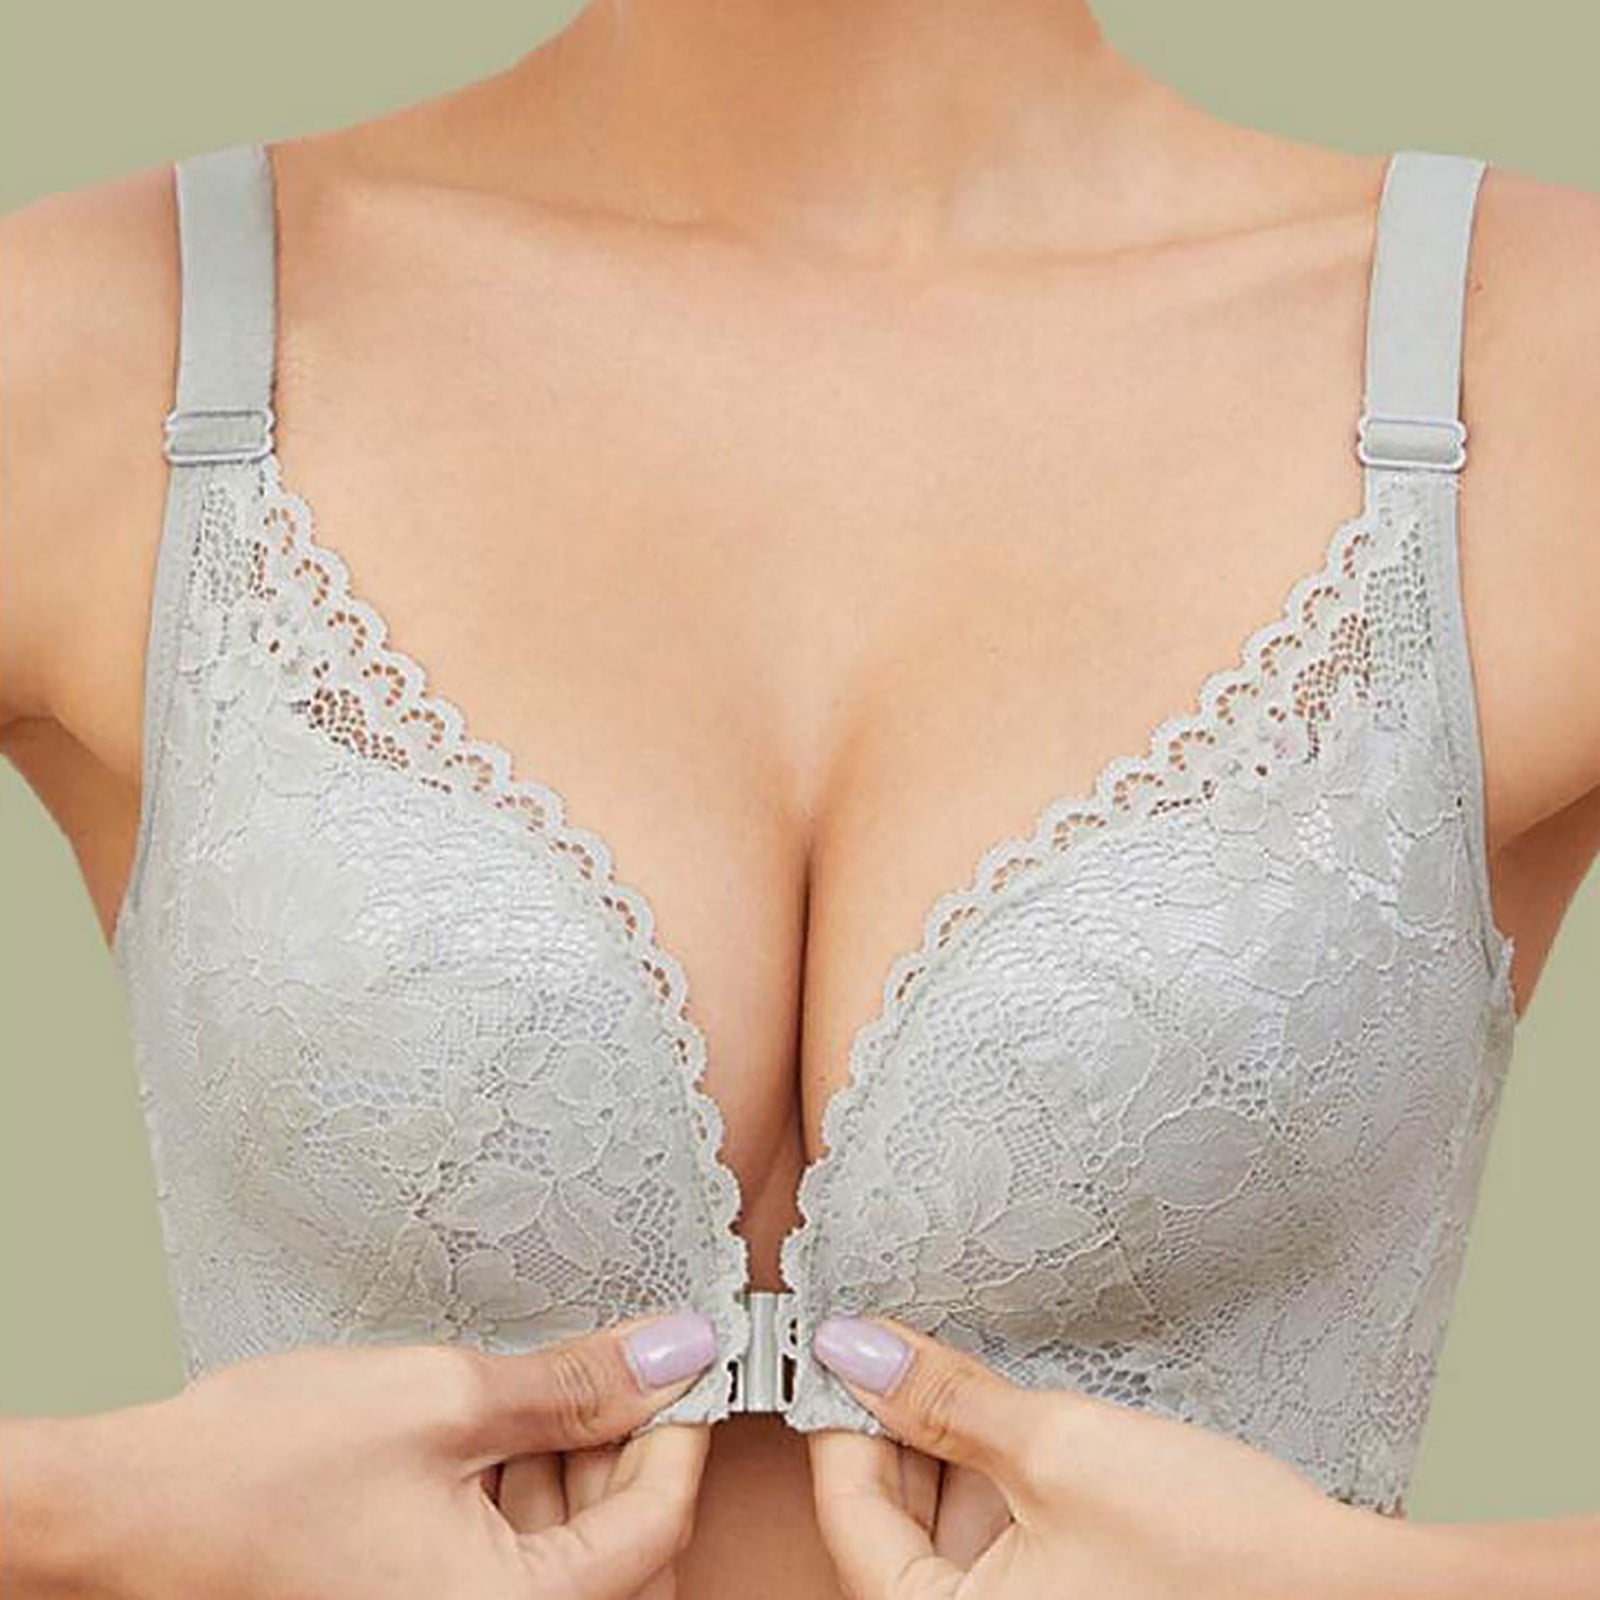 GATXVG Front Closure Double Support Wireless Bra, Lace Bra with  Stay-in-Place Straps, Full-Coverage Wire-Free Lightly Lined Comfort  Bralette for Everyday Wear 